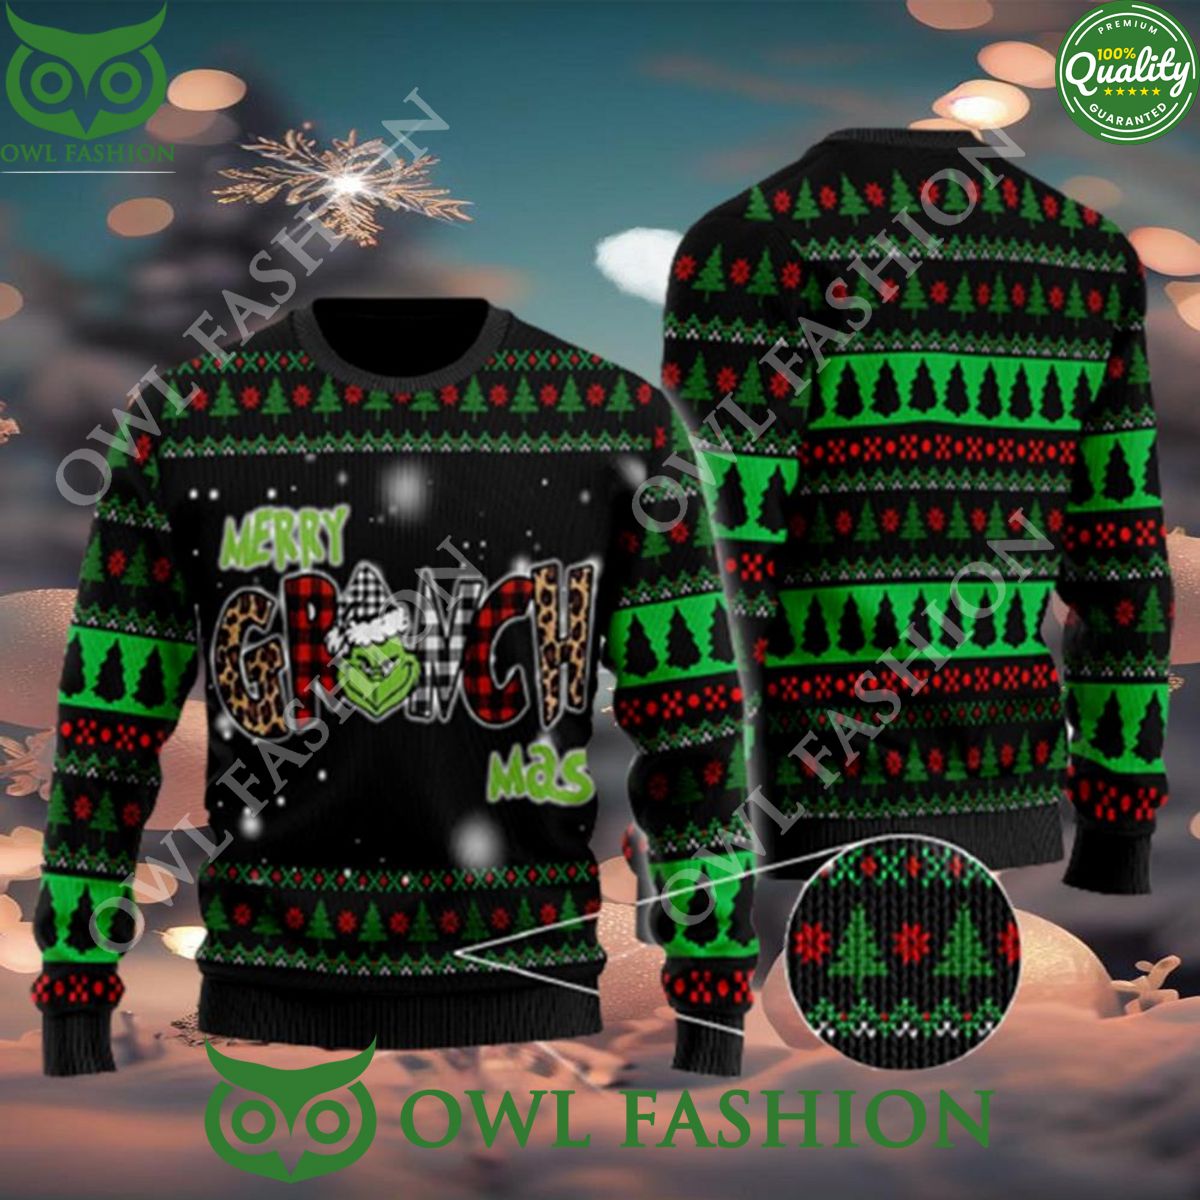 merry grinch mas woolen funny the ugly christmas sweater jumper 1 iMjIN.jpg